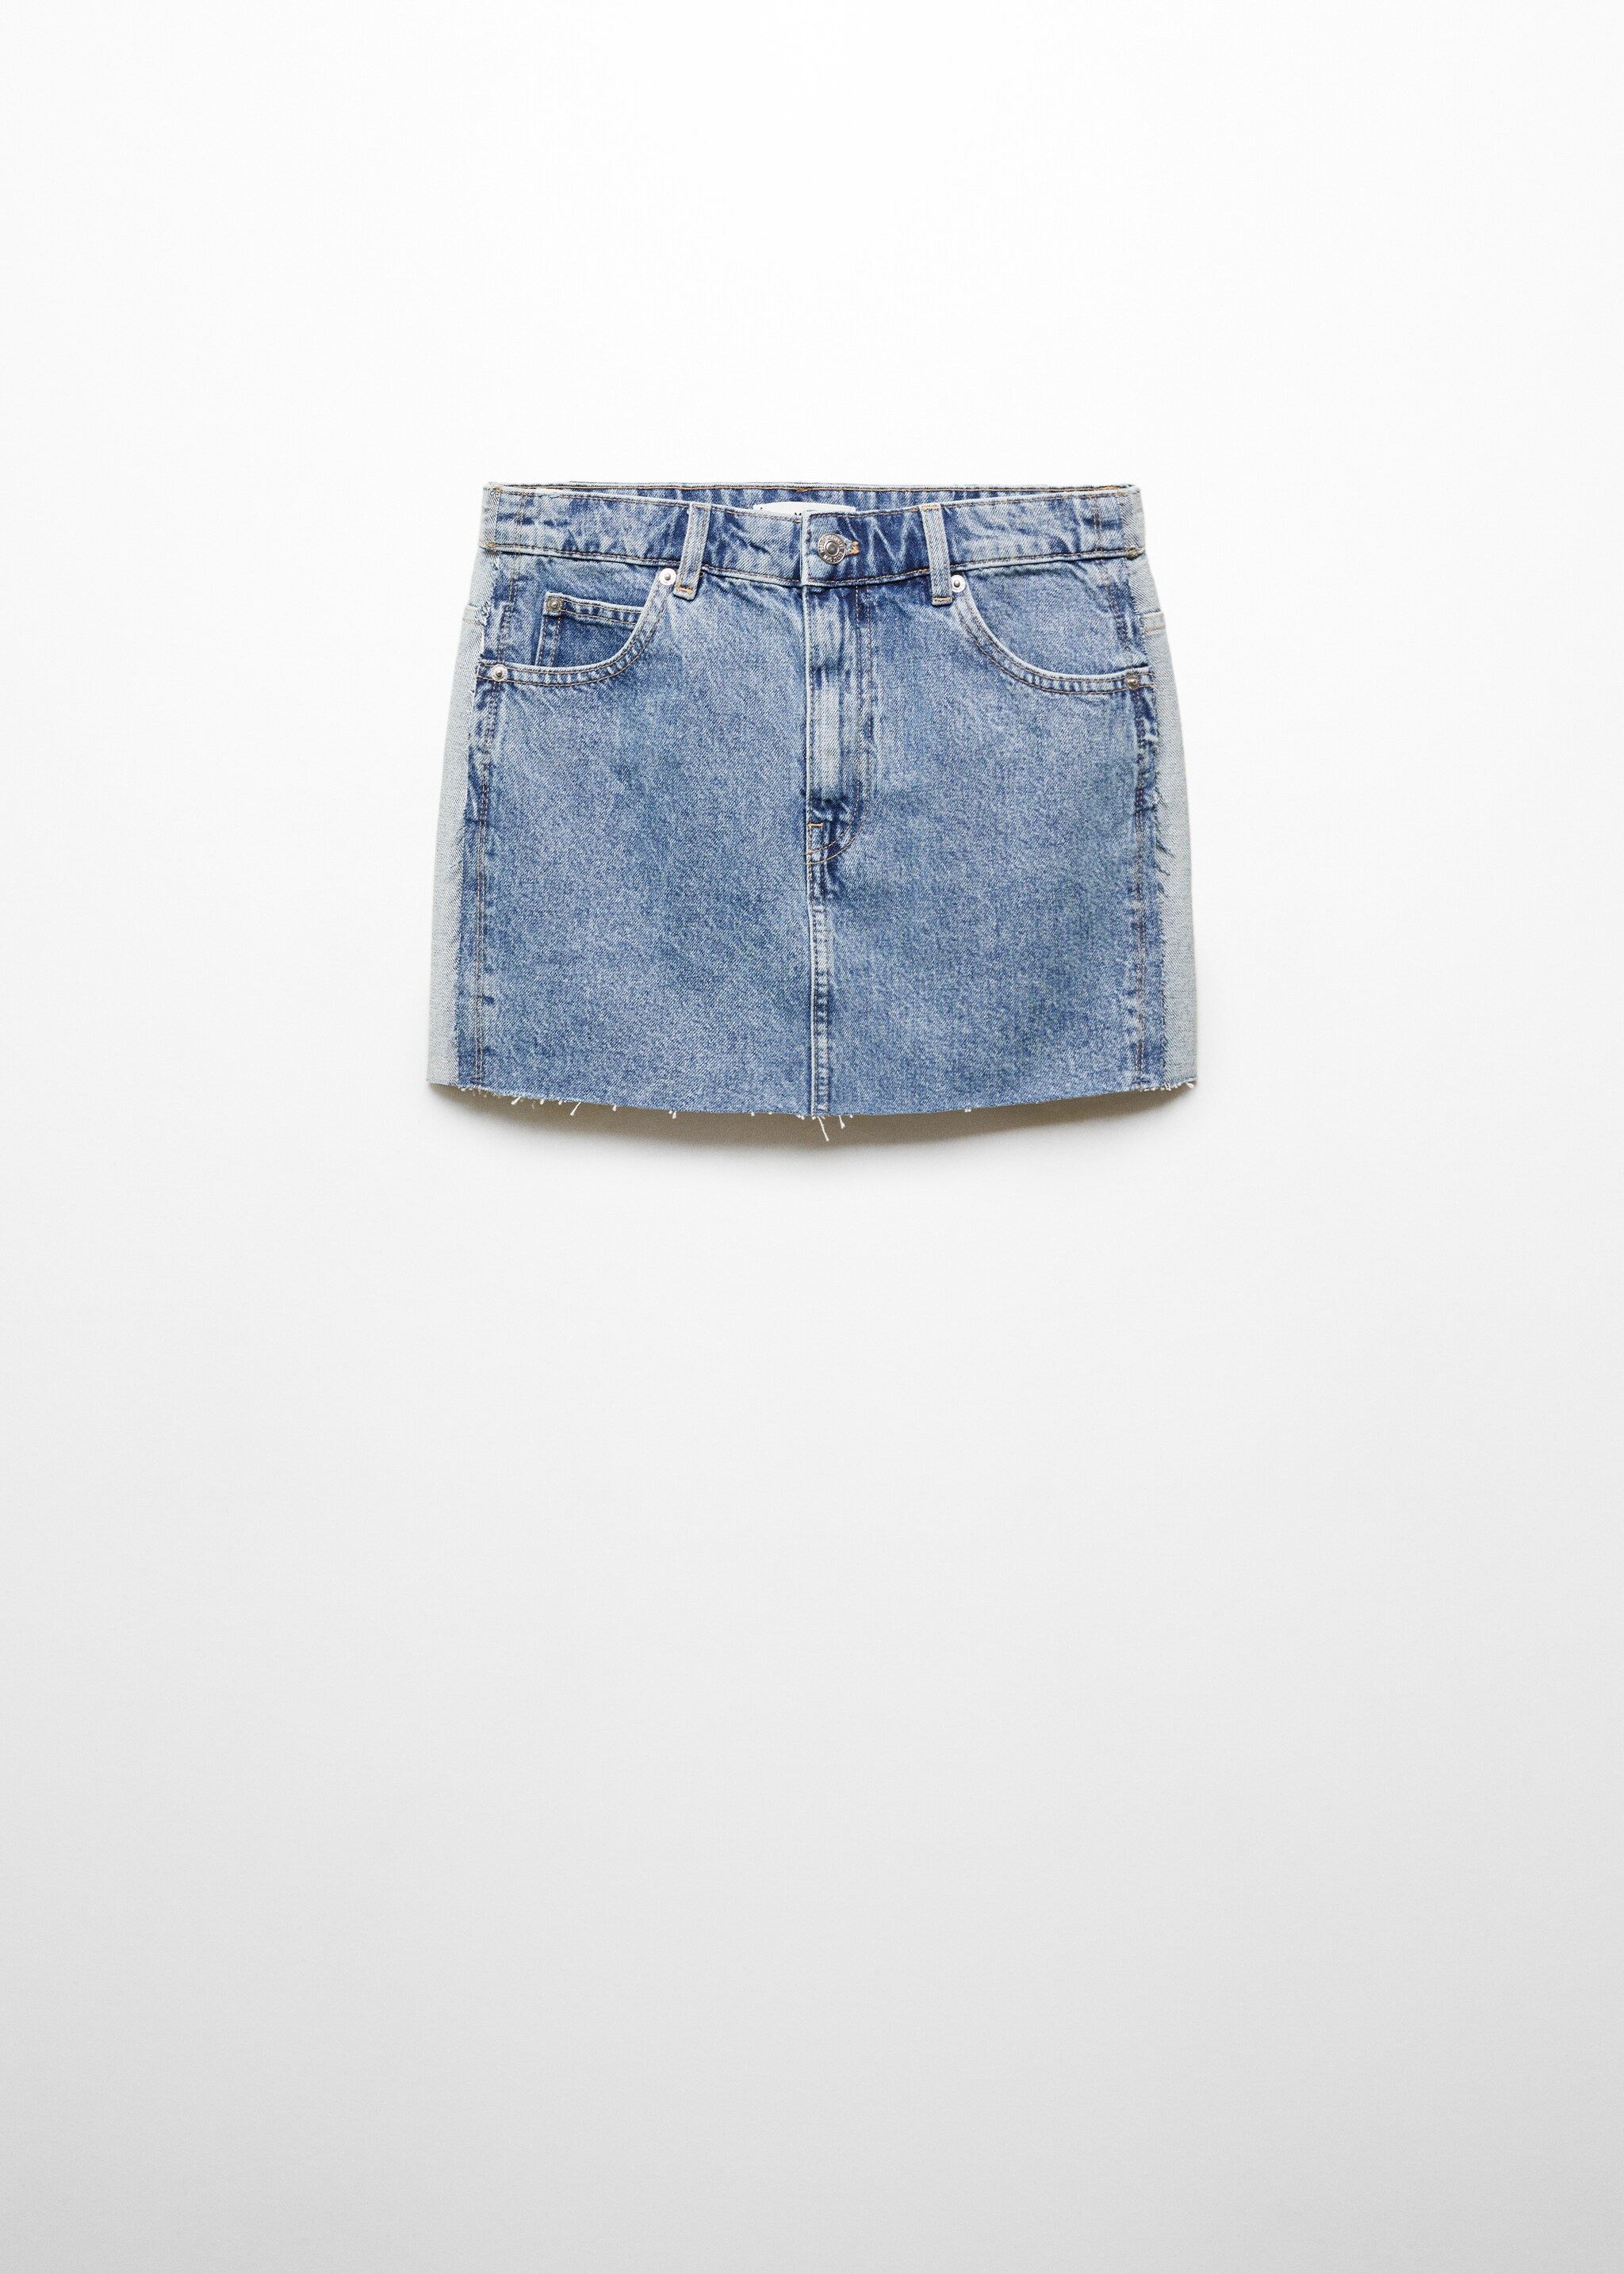 Two-tone denim miniskirt - Article without model